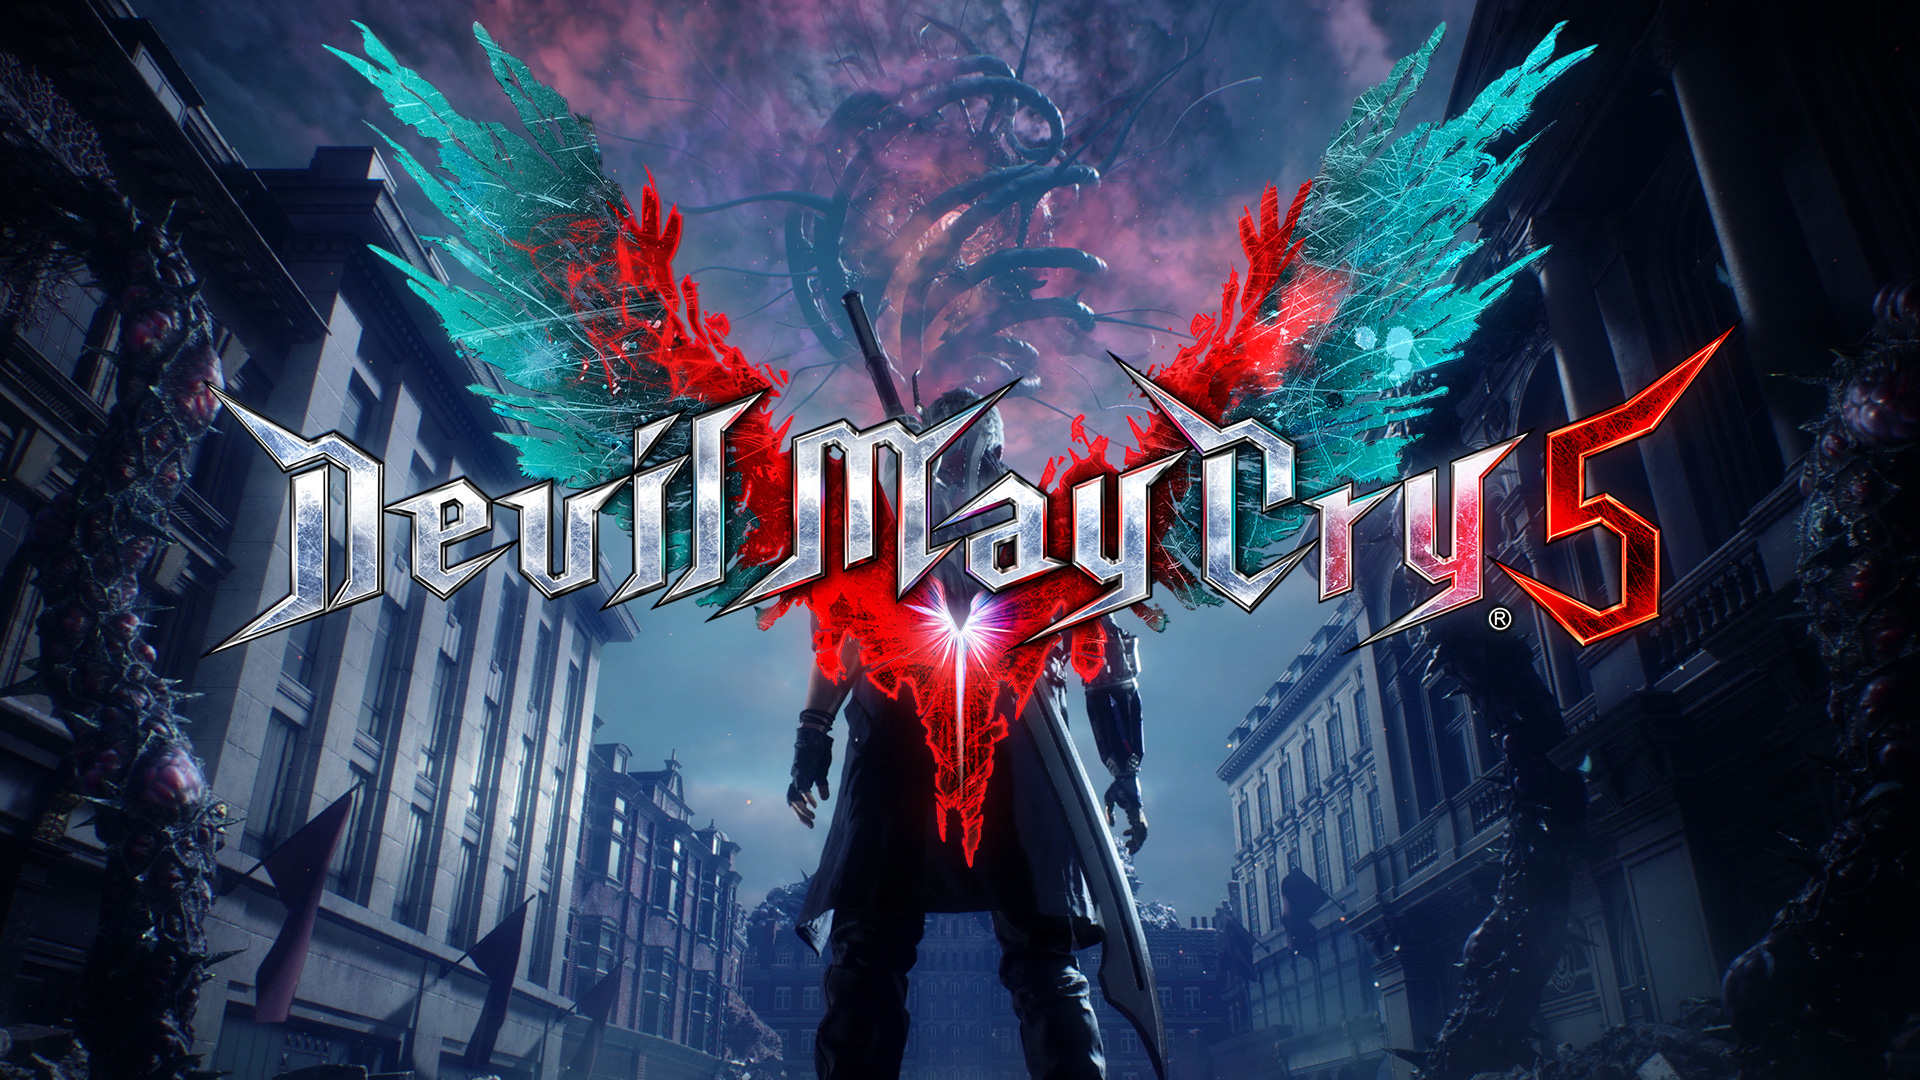 Devil may cry 4 on steam фото 37